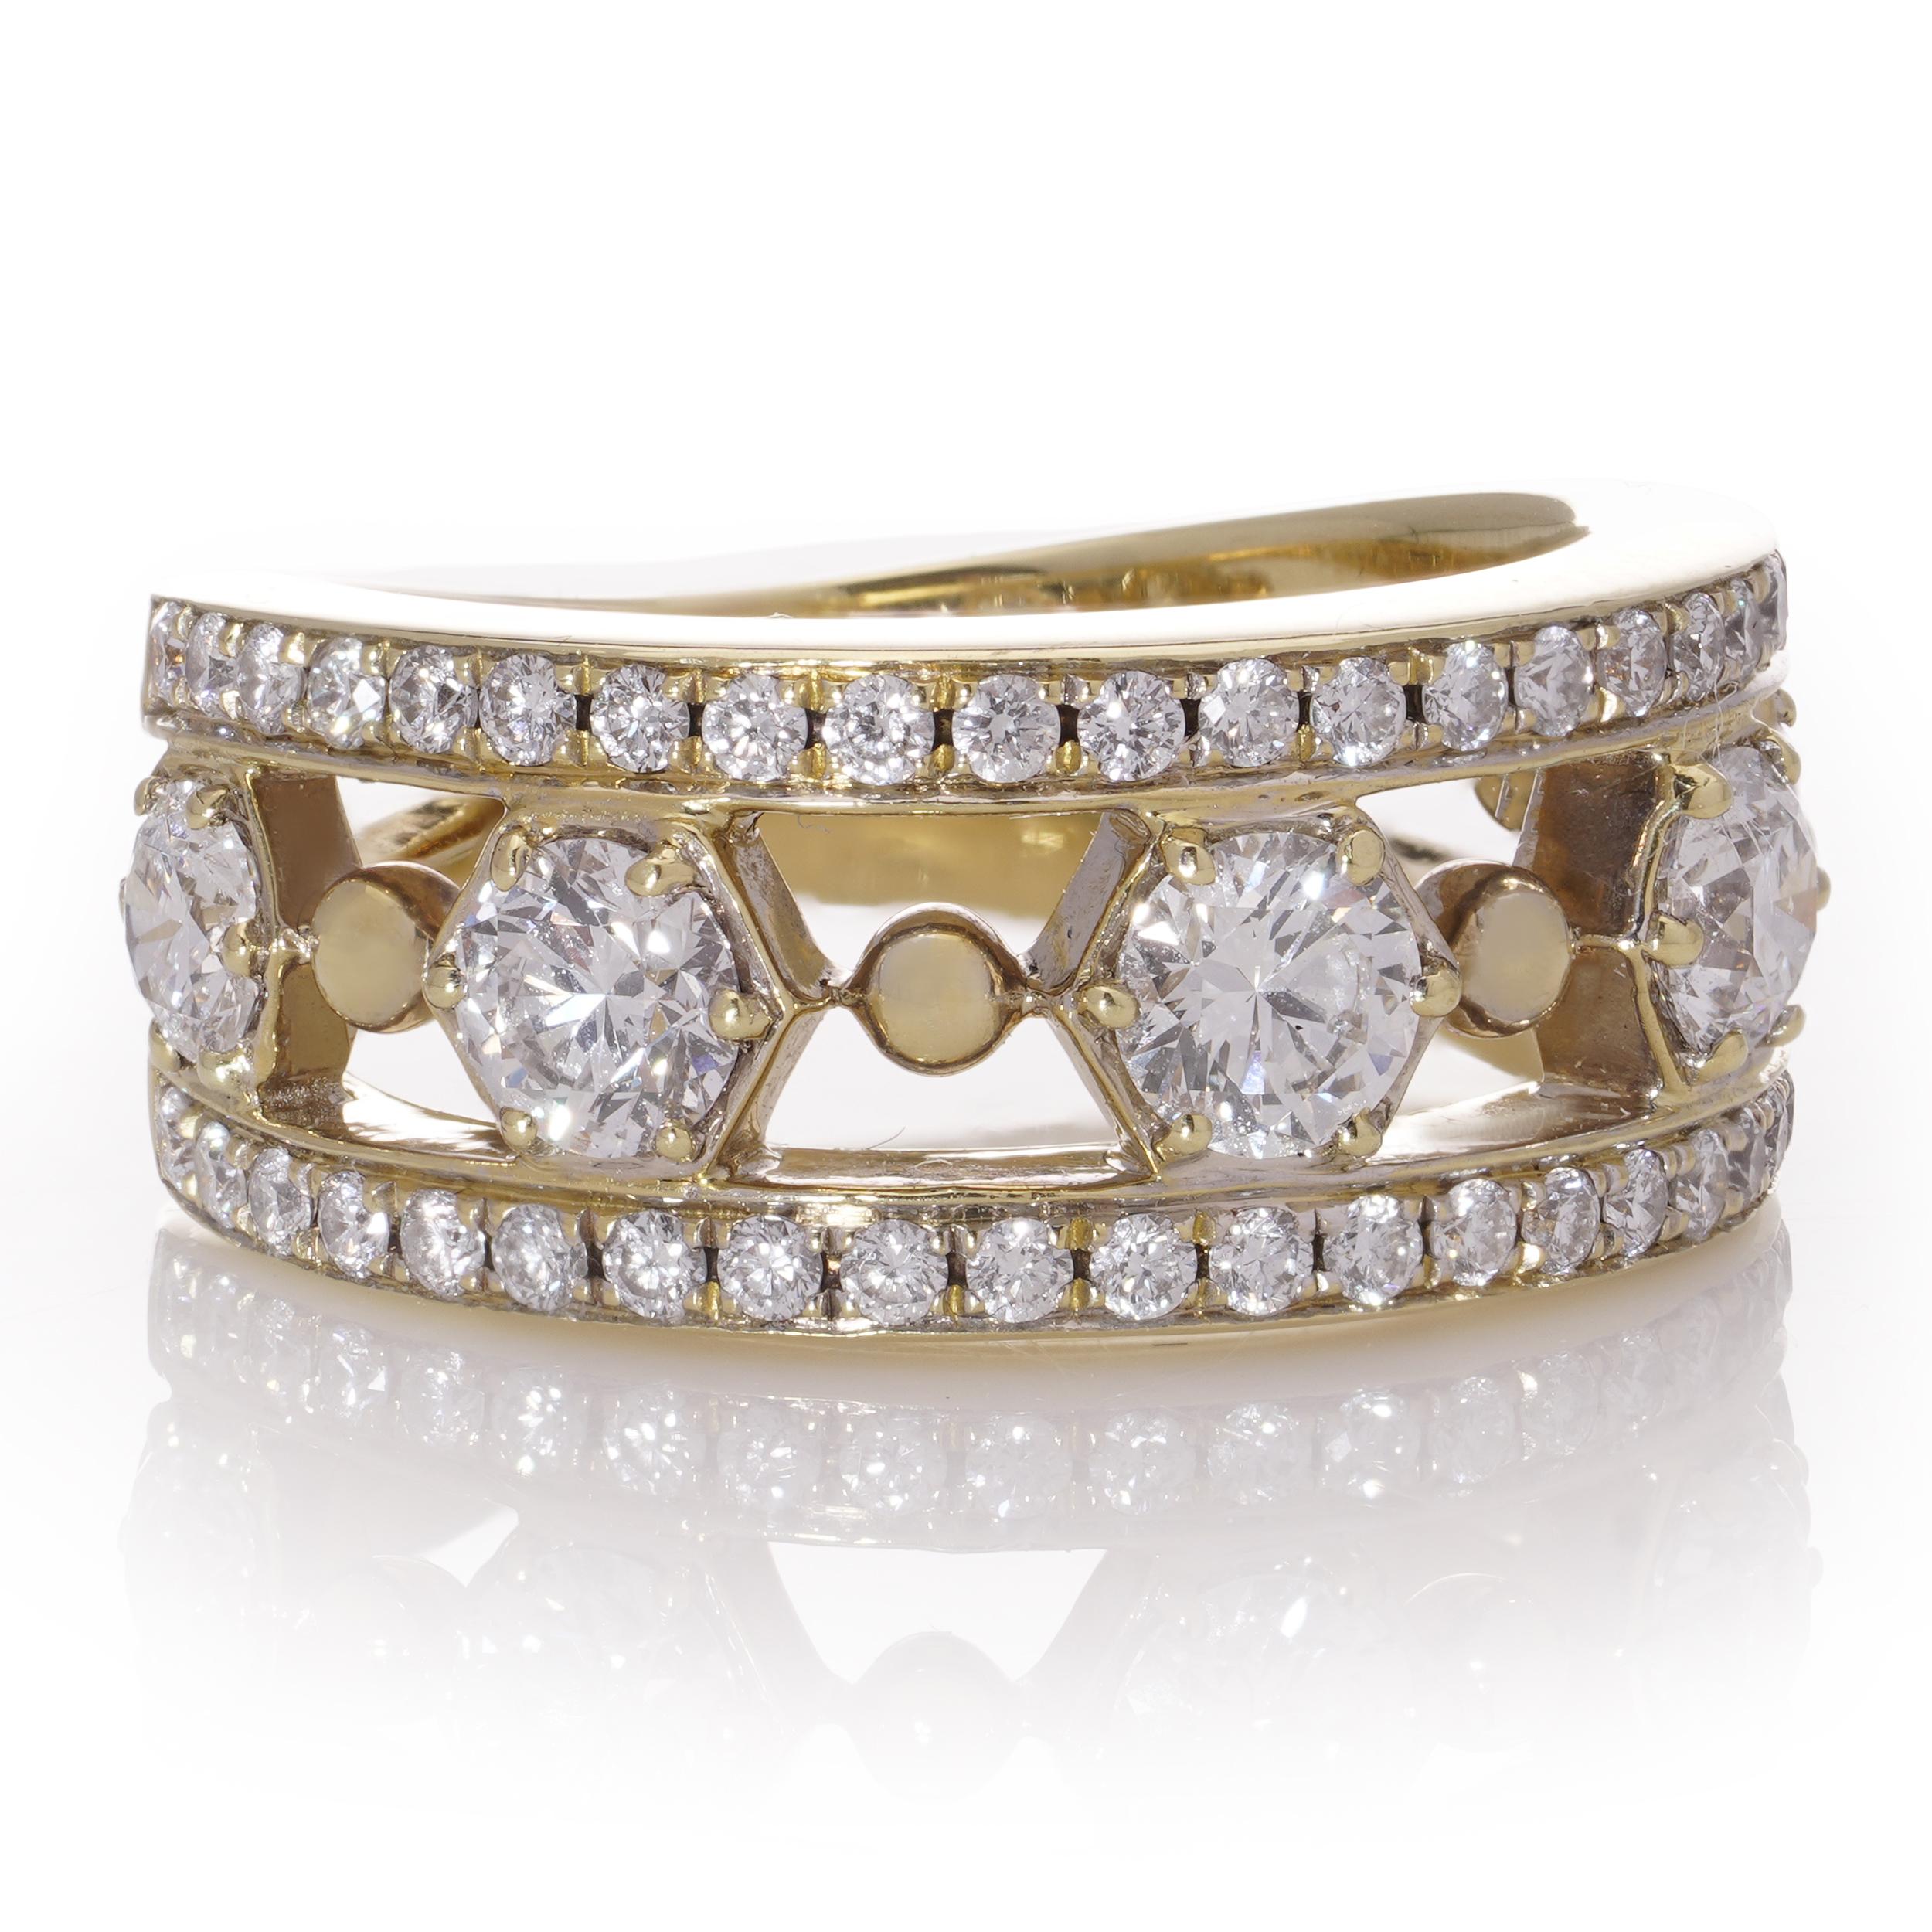 Boodles & Dunthorne 18kt. gold band ring with 1.46 cts of diamonds In Good Condition For Sale In Braintree, GB